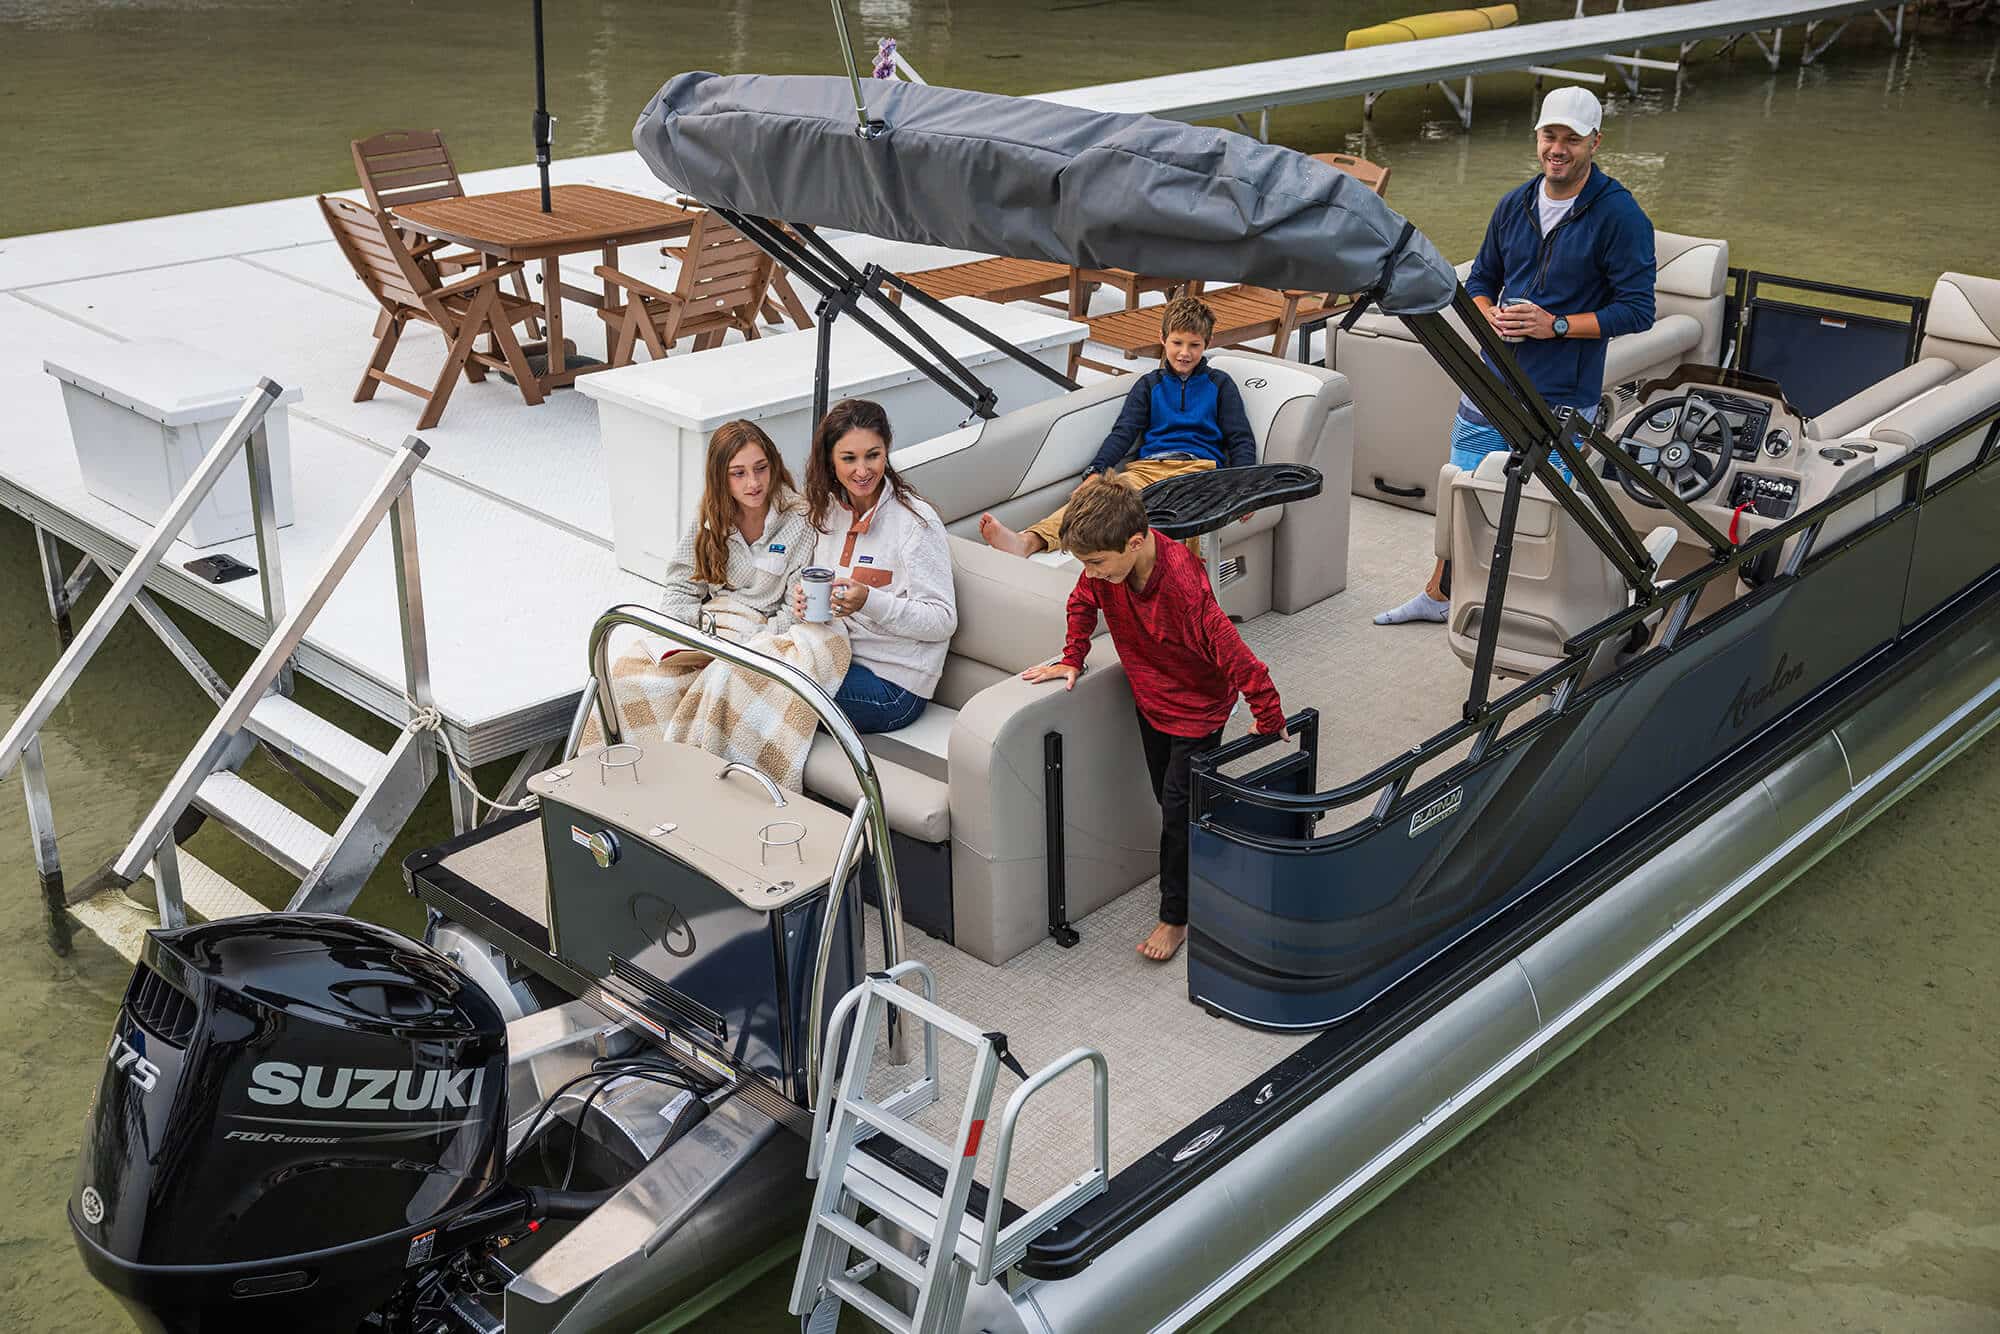 Great Accessories to Customize your Pontoon Boat